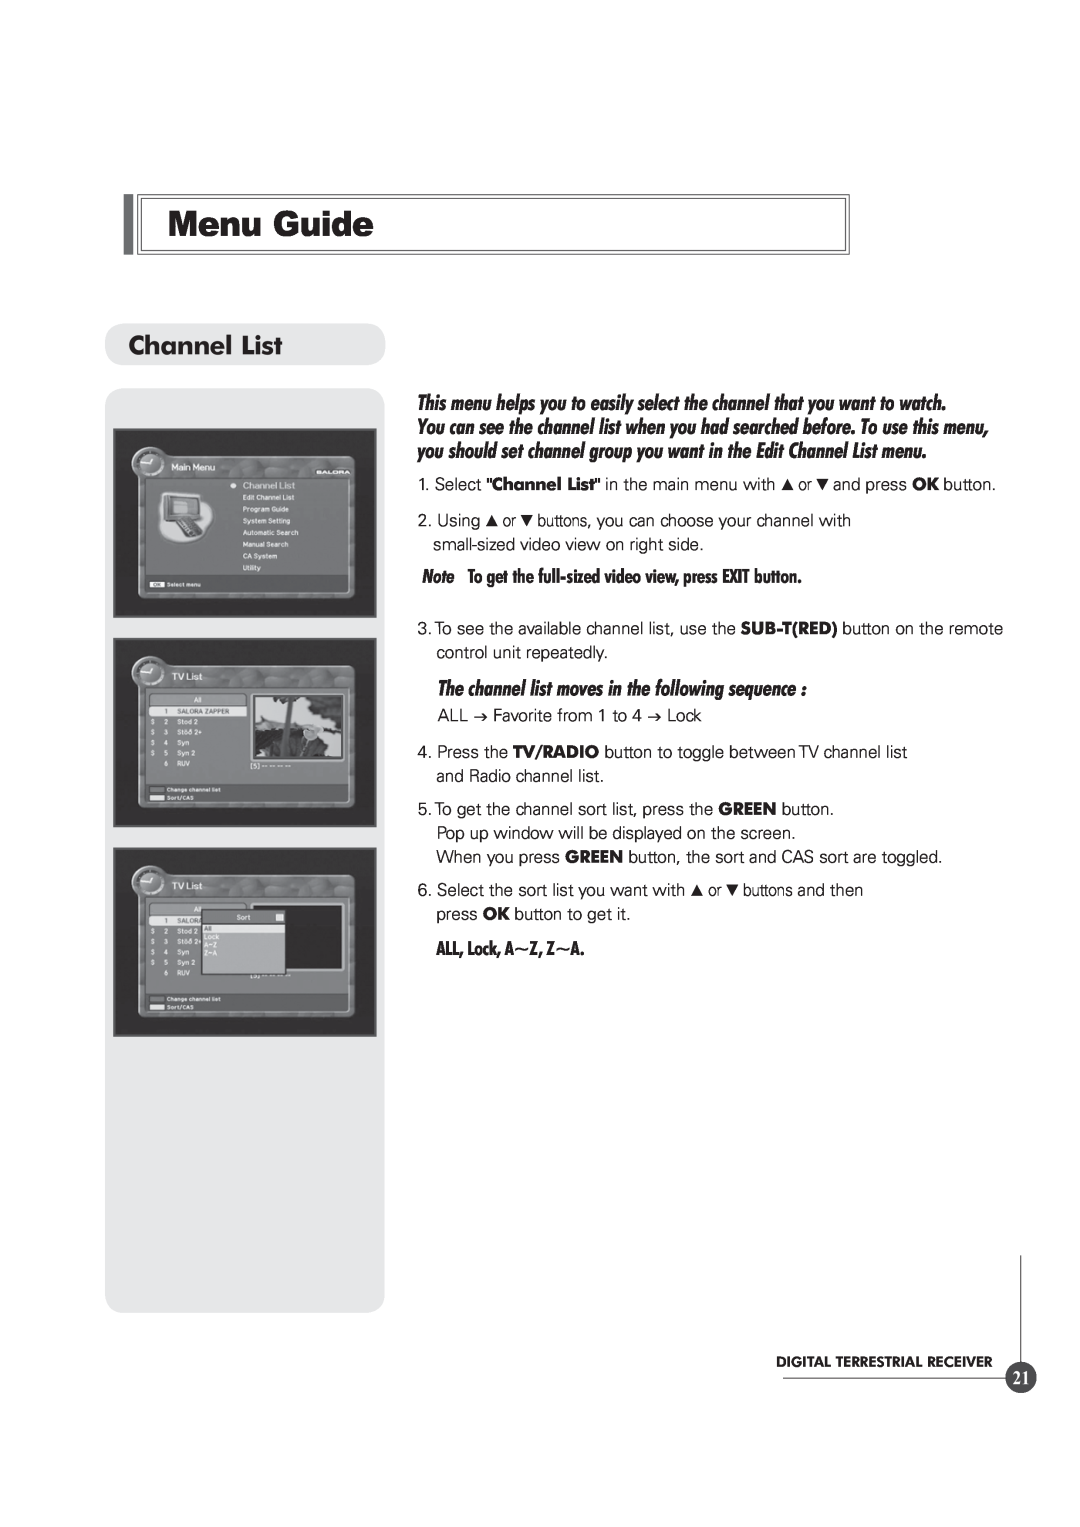 Triax TR 305 manual Channel List, The channel list moves in the following sequence, Menu Guide 